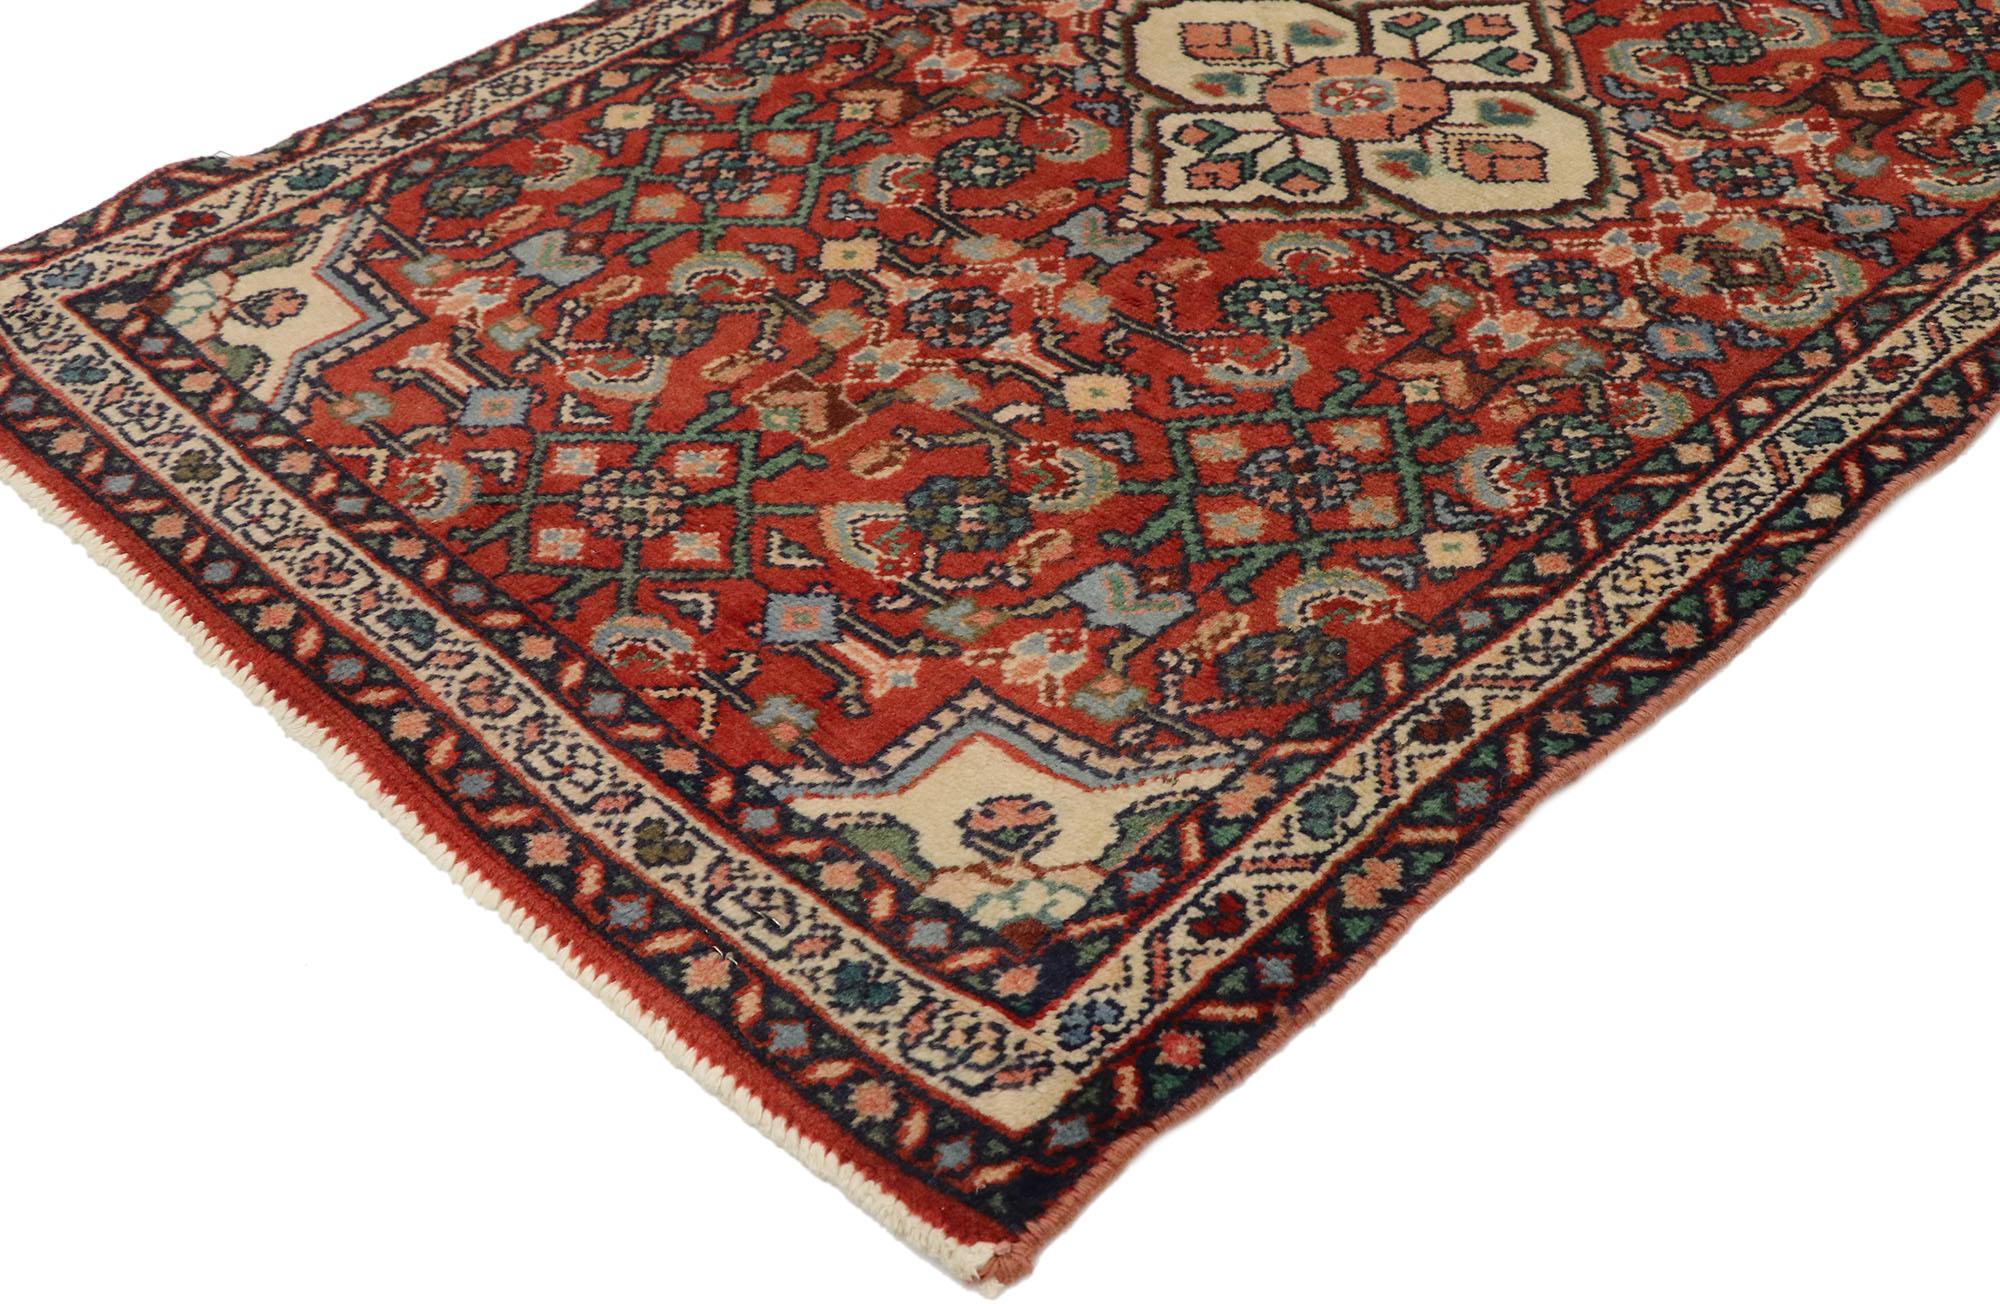 76035, vintage Persian Hamadan accent rug with Medallion Design. Known for their wide variety of both geometric and floral styles, the thick wool pile of Hamadan rugs makes for a sturdy and reliable carpet. This hand knotted wool vintage Persian